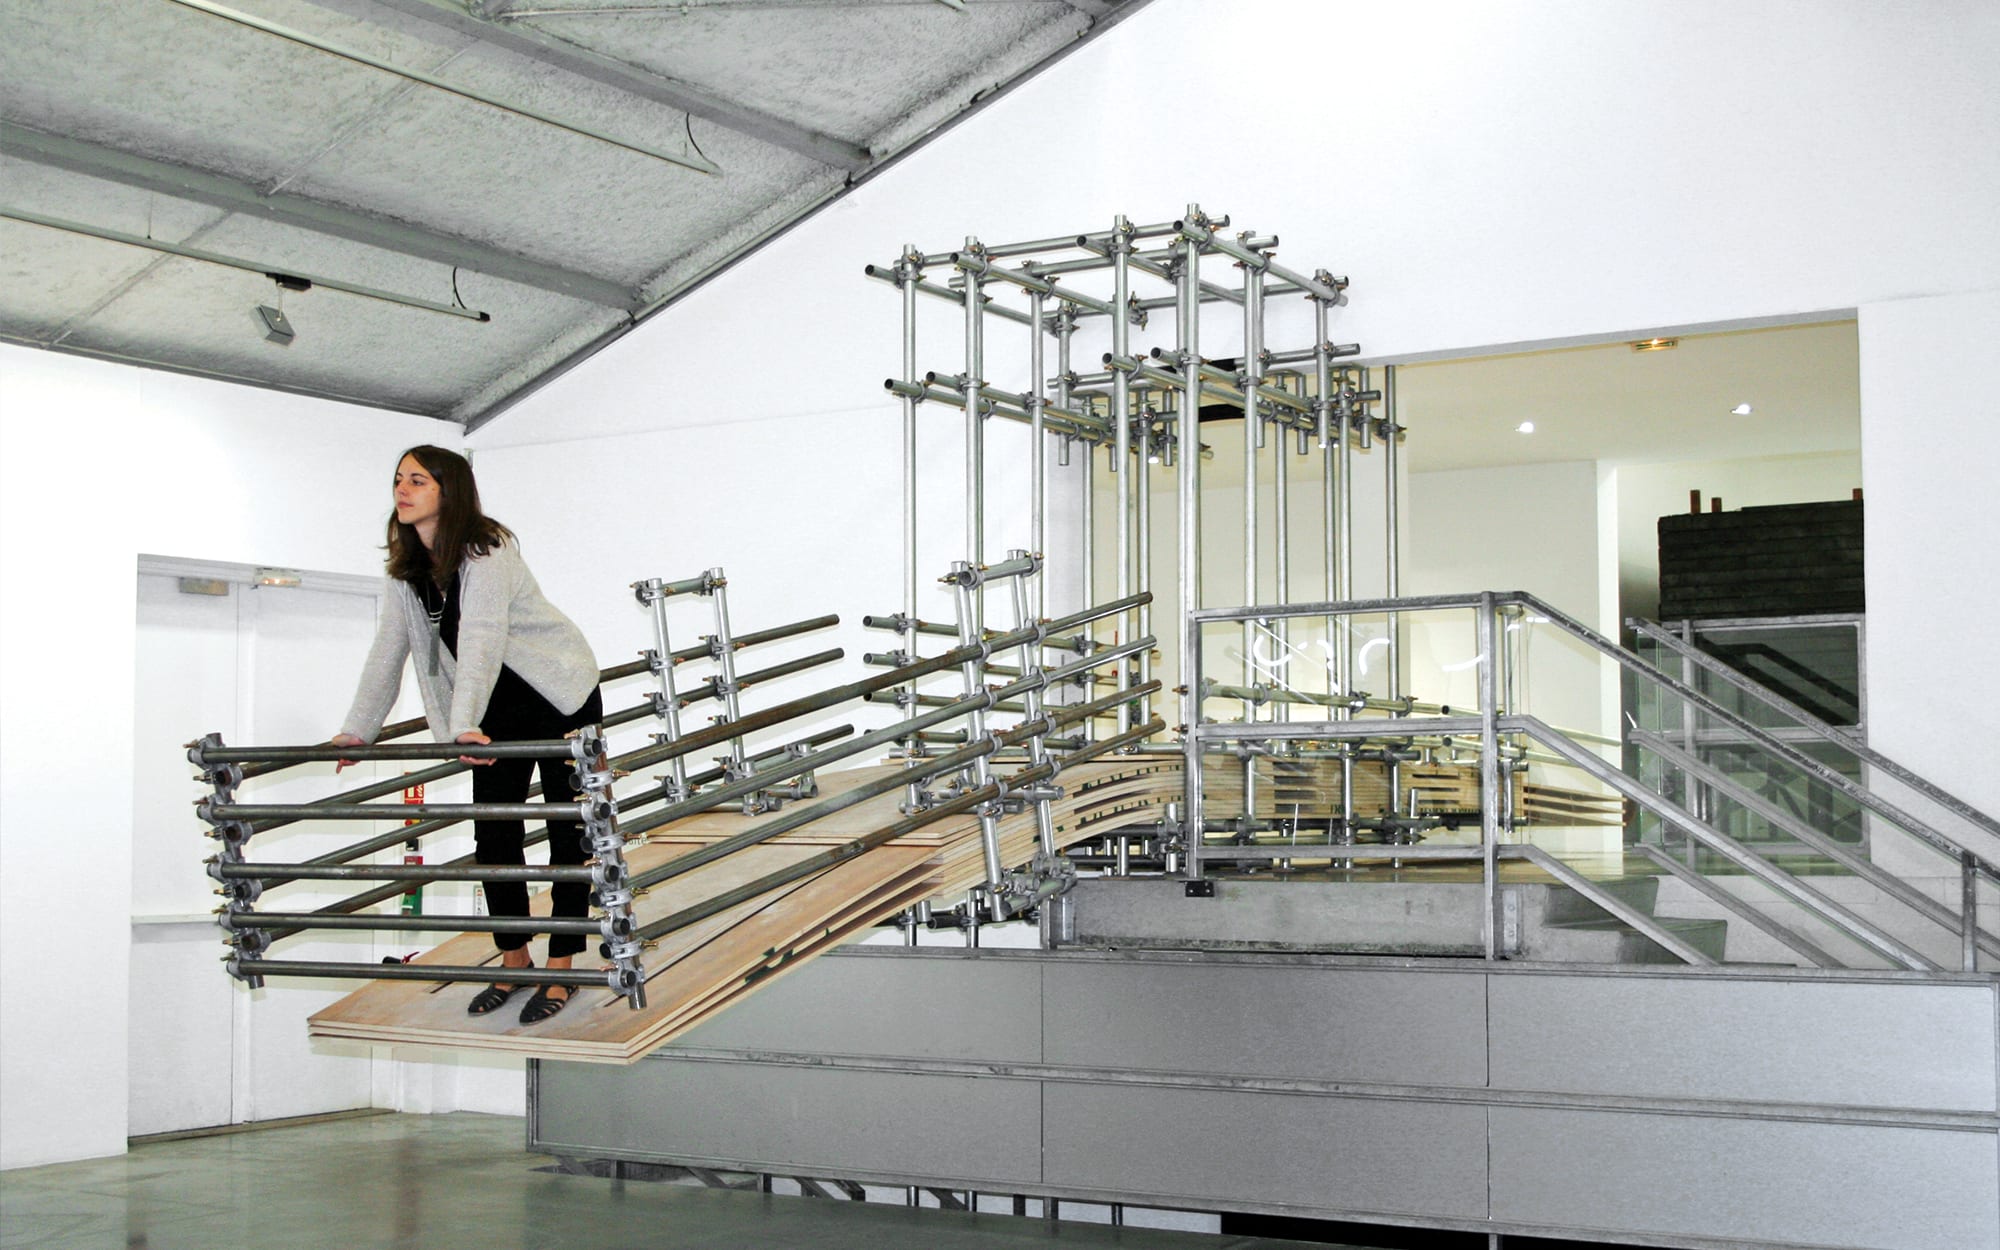 Metasbilad, 2015, phenolic panels, metal tubes, and scaffolding clamps, installation view in 'My Buenos Aires, La Maison Rouge' at the Fondation Antoine de Galbert, Paris. Courtesy of the artist.